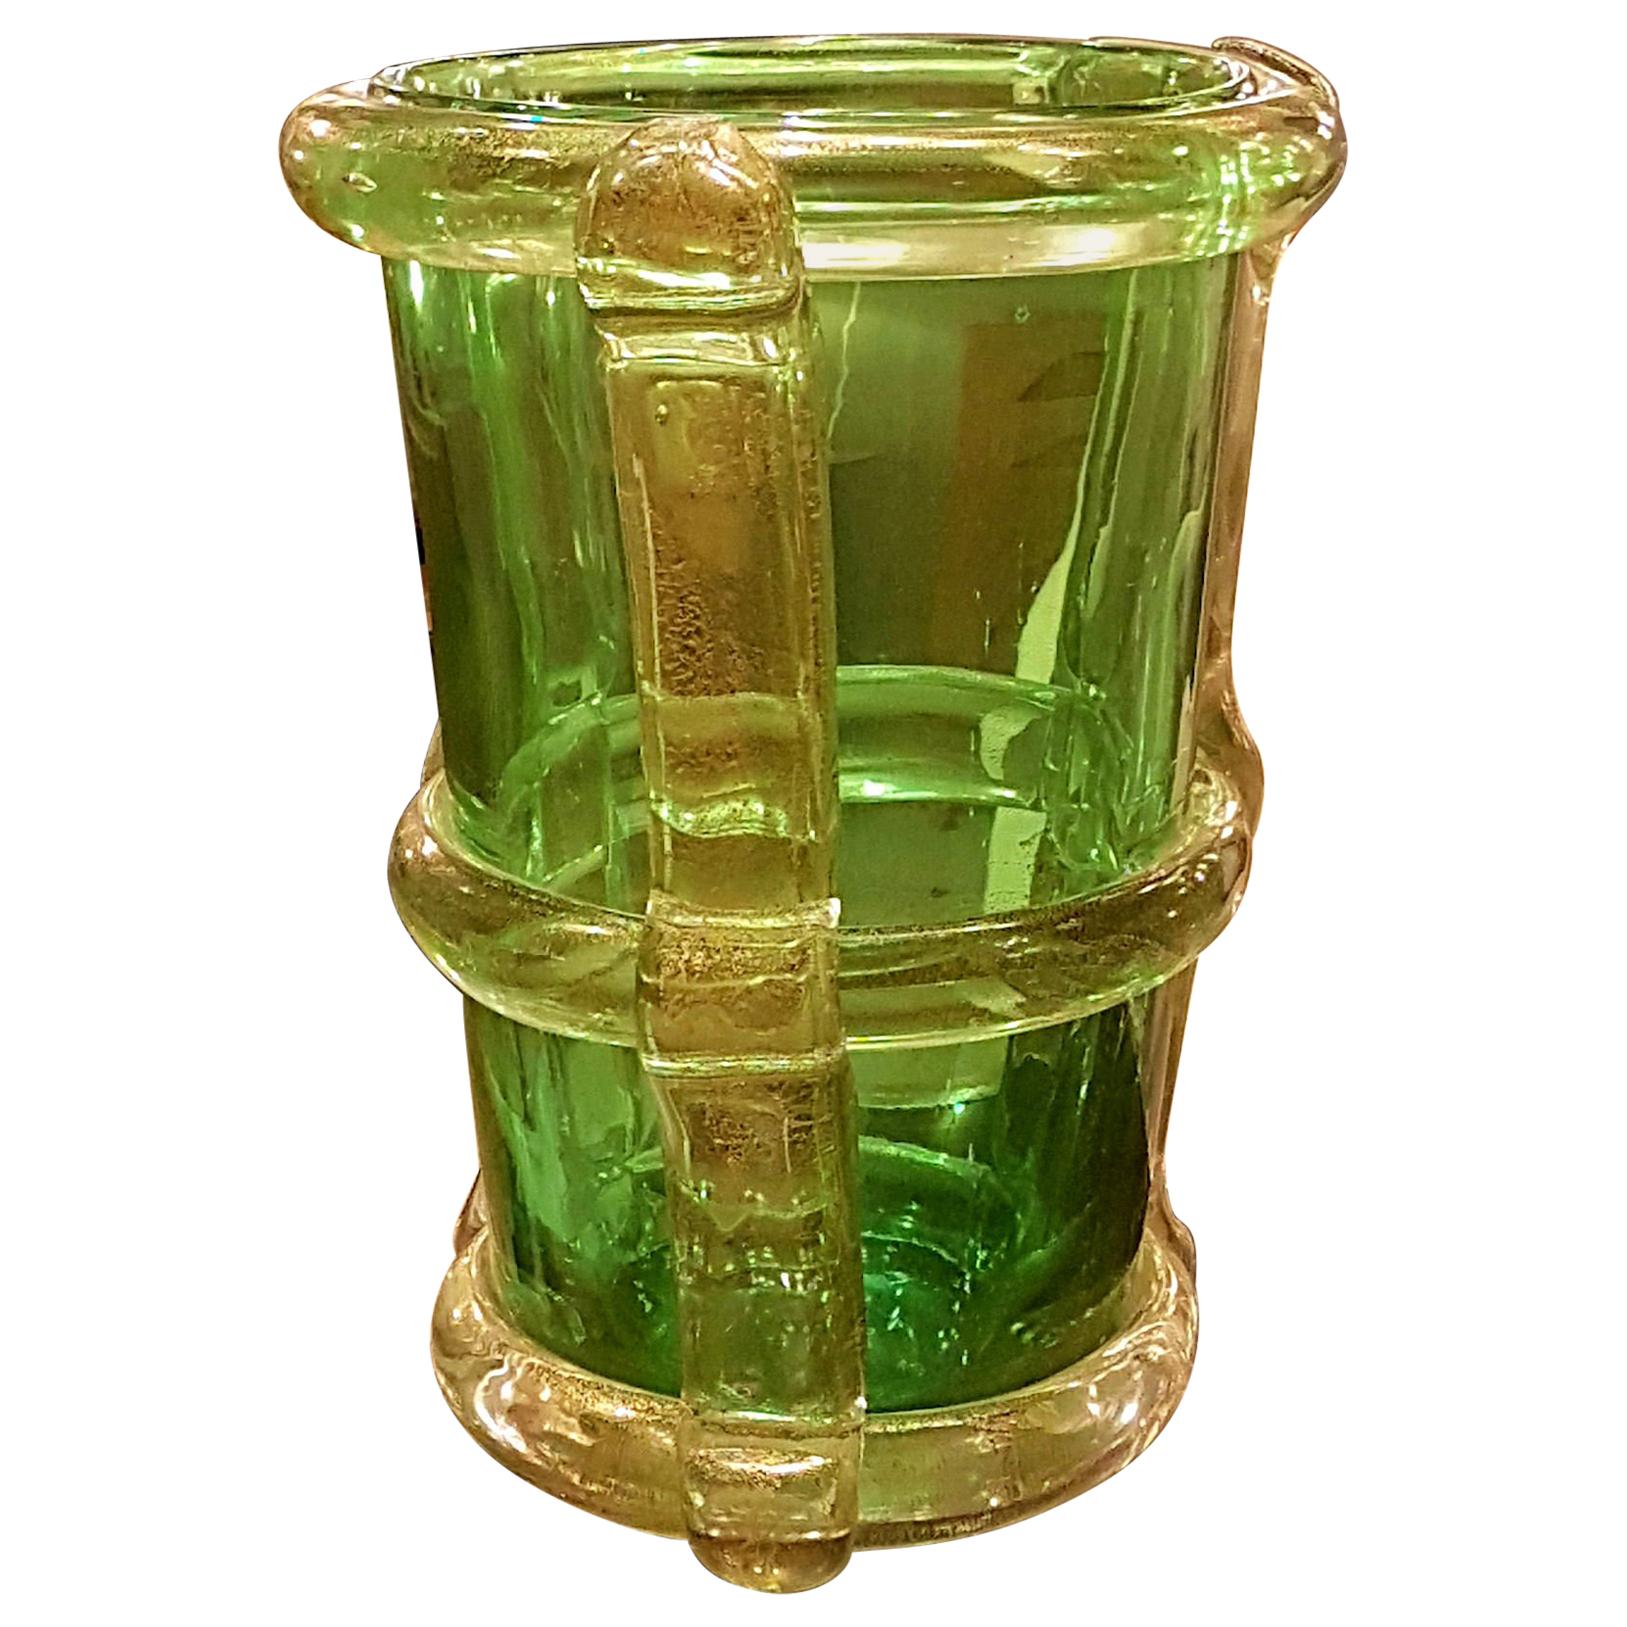 Large green and gold leaf thick handmade Murano glass pair of vases.
Heavy and thick glass work, from 1970s.
Handmade Italian Murano glass pair of vases attributed to Barbini.
Murano, Italy, 1970s.